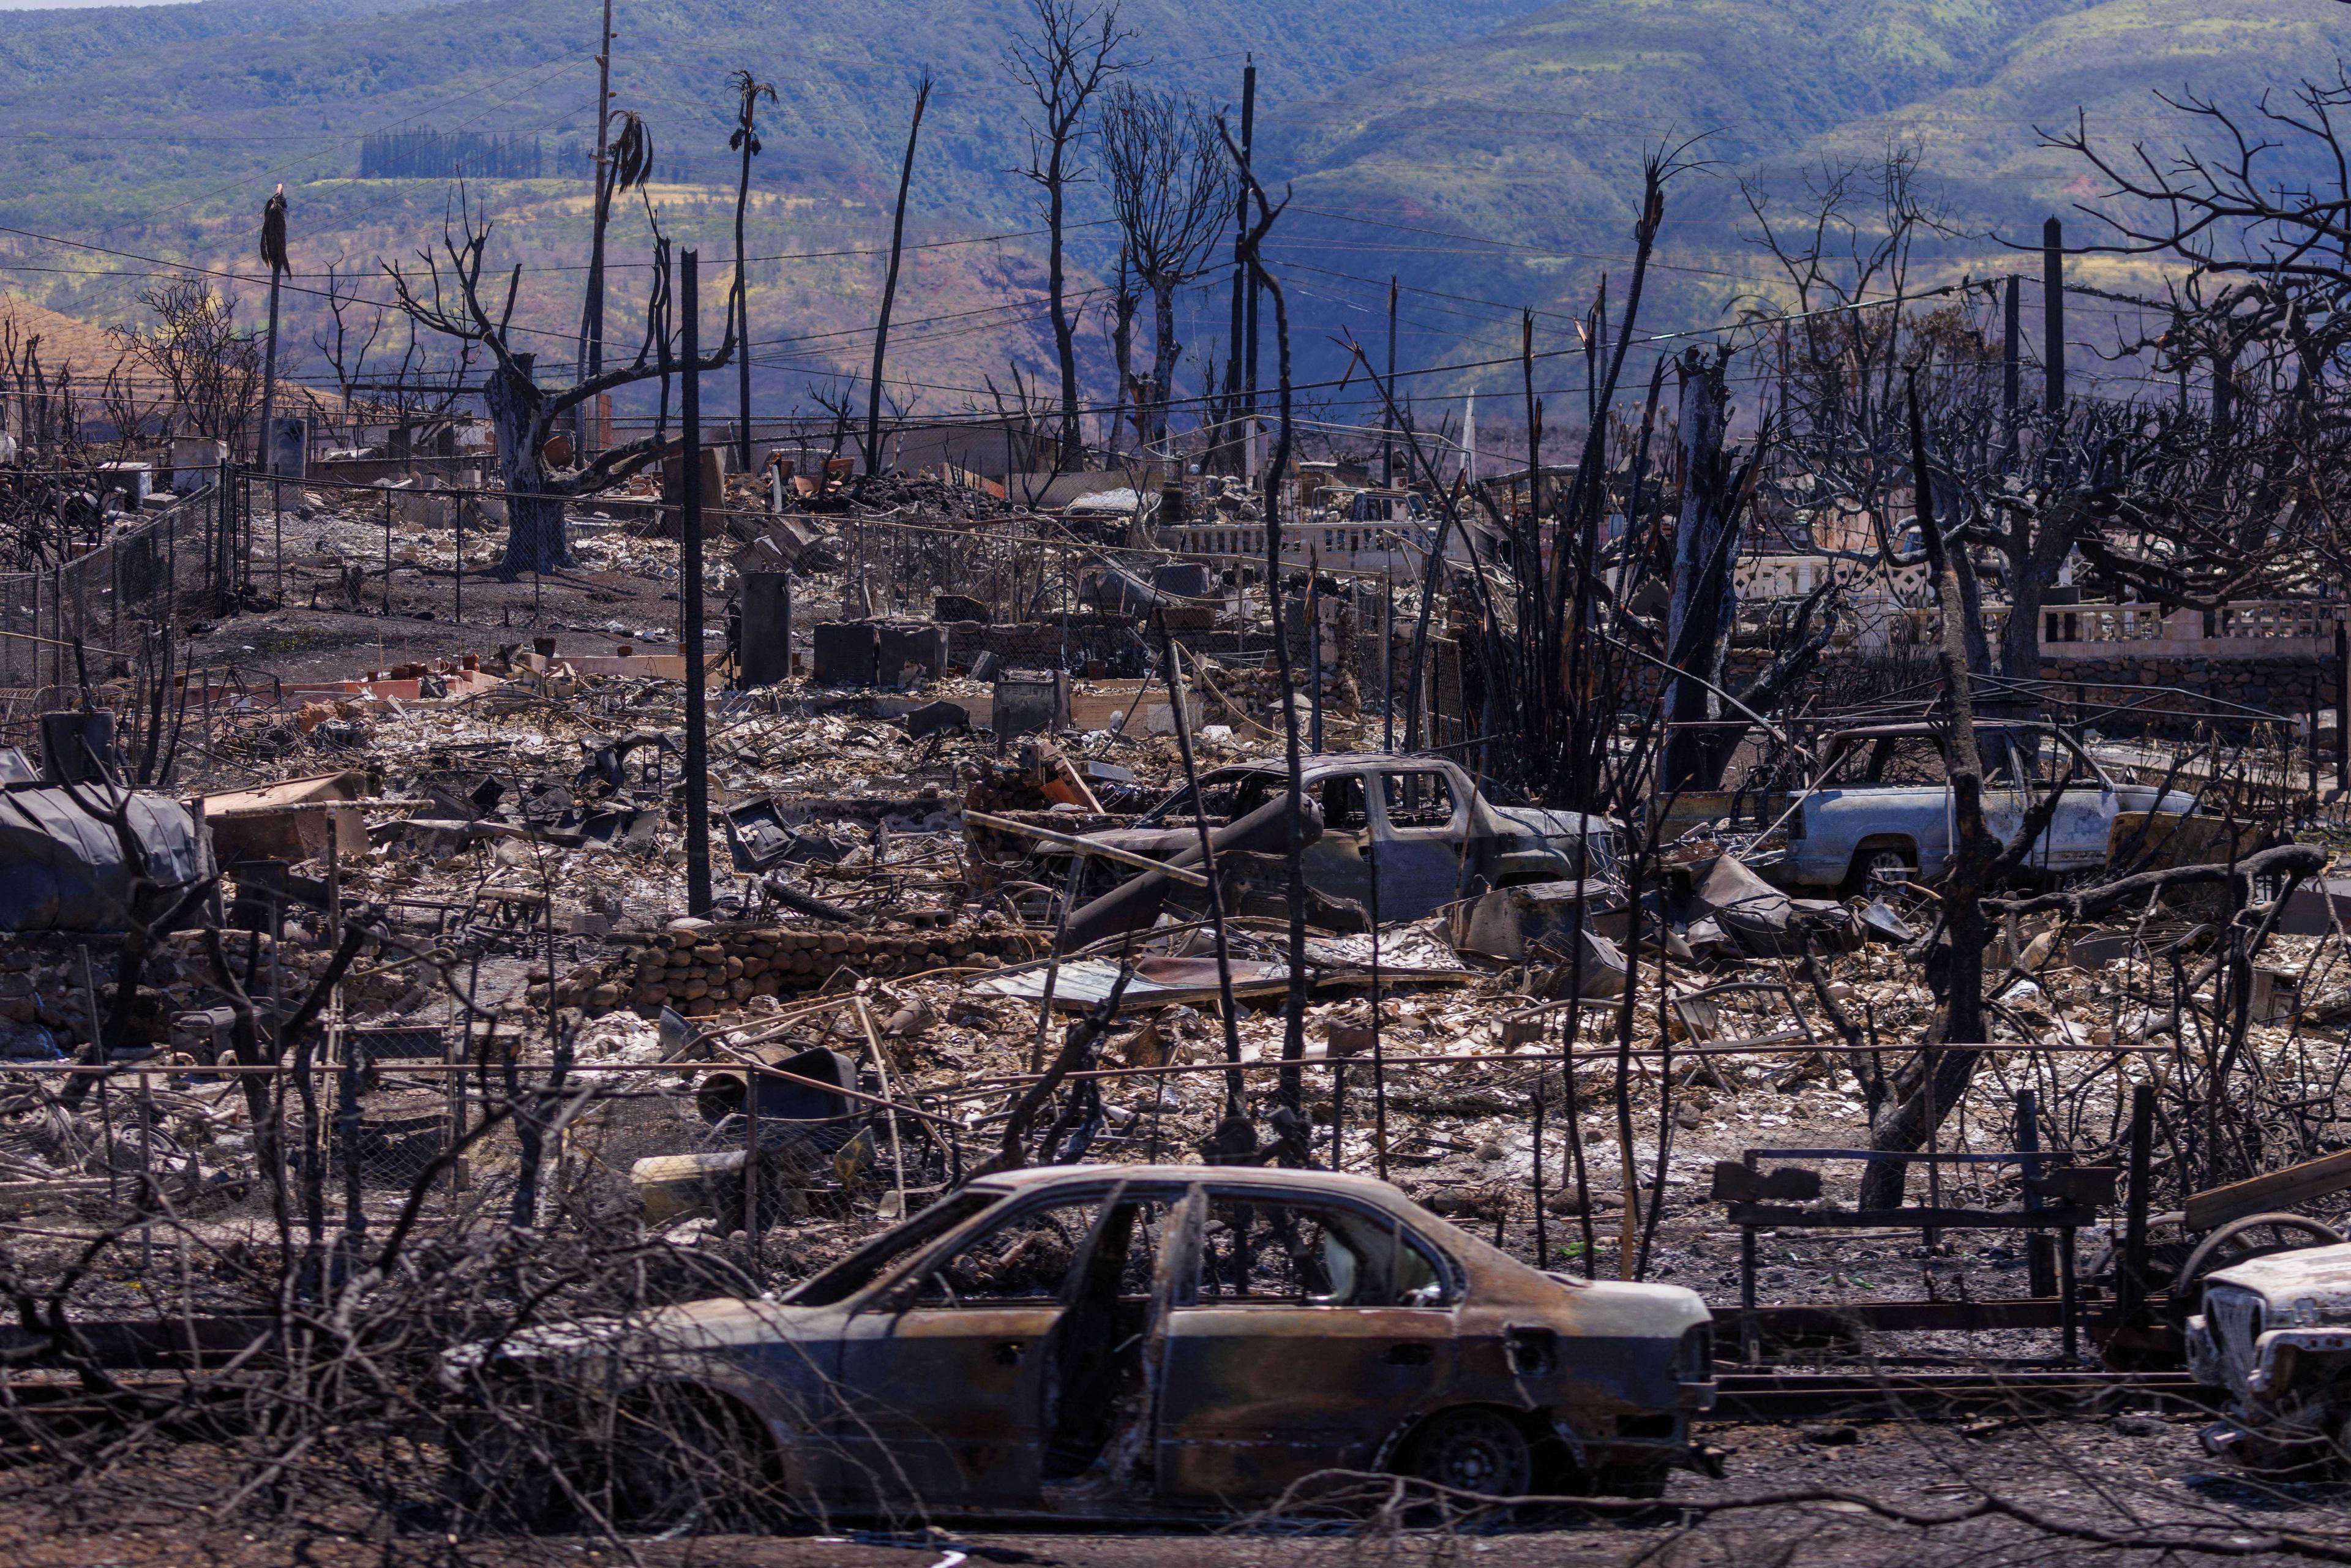 Fire damage is shown in the Wahikuli Terrace neighborhood in the fire ravaged town of Lahaina on the island of Maui in Hawaii, US, Aug 15. Photo: Reuters